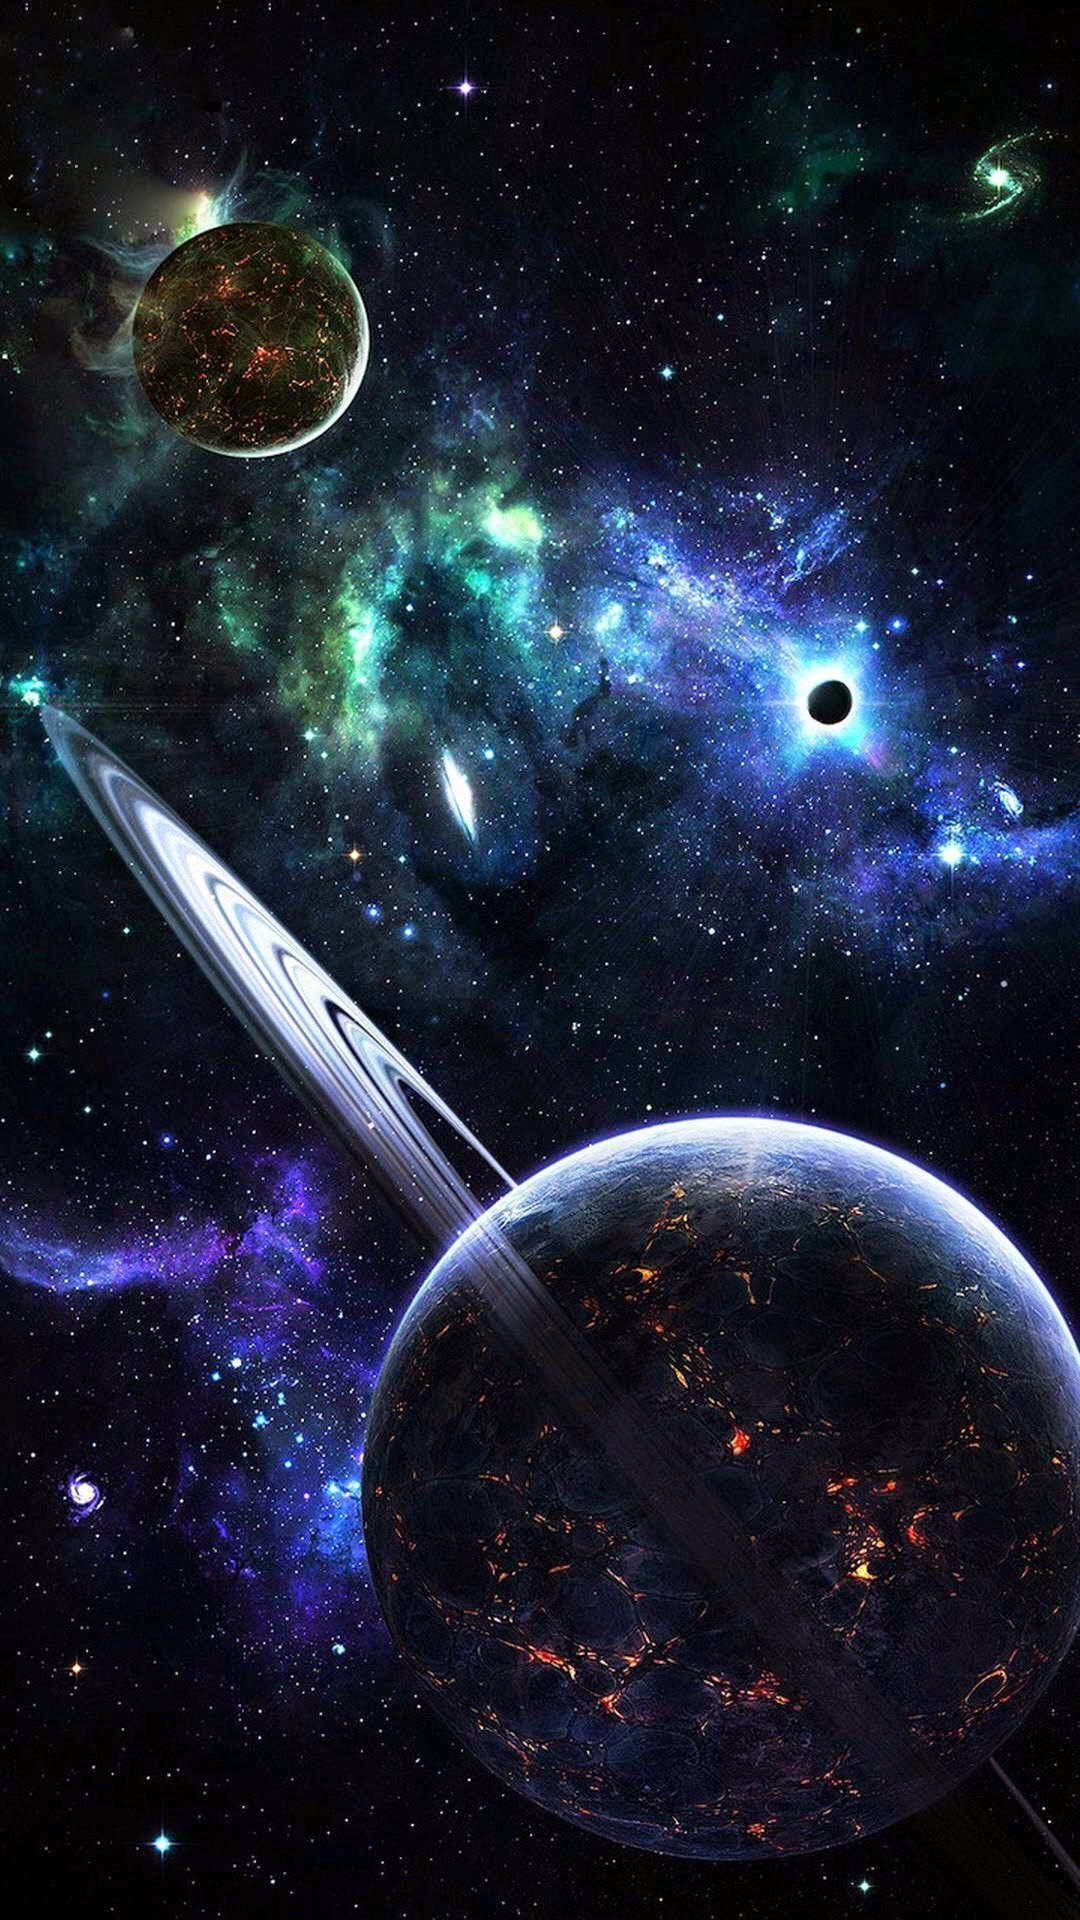 Background and Wallpaper. Wallpaper space, Space art, Planets wallpaper